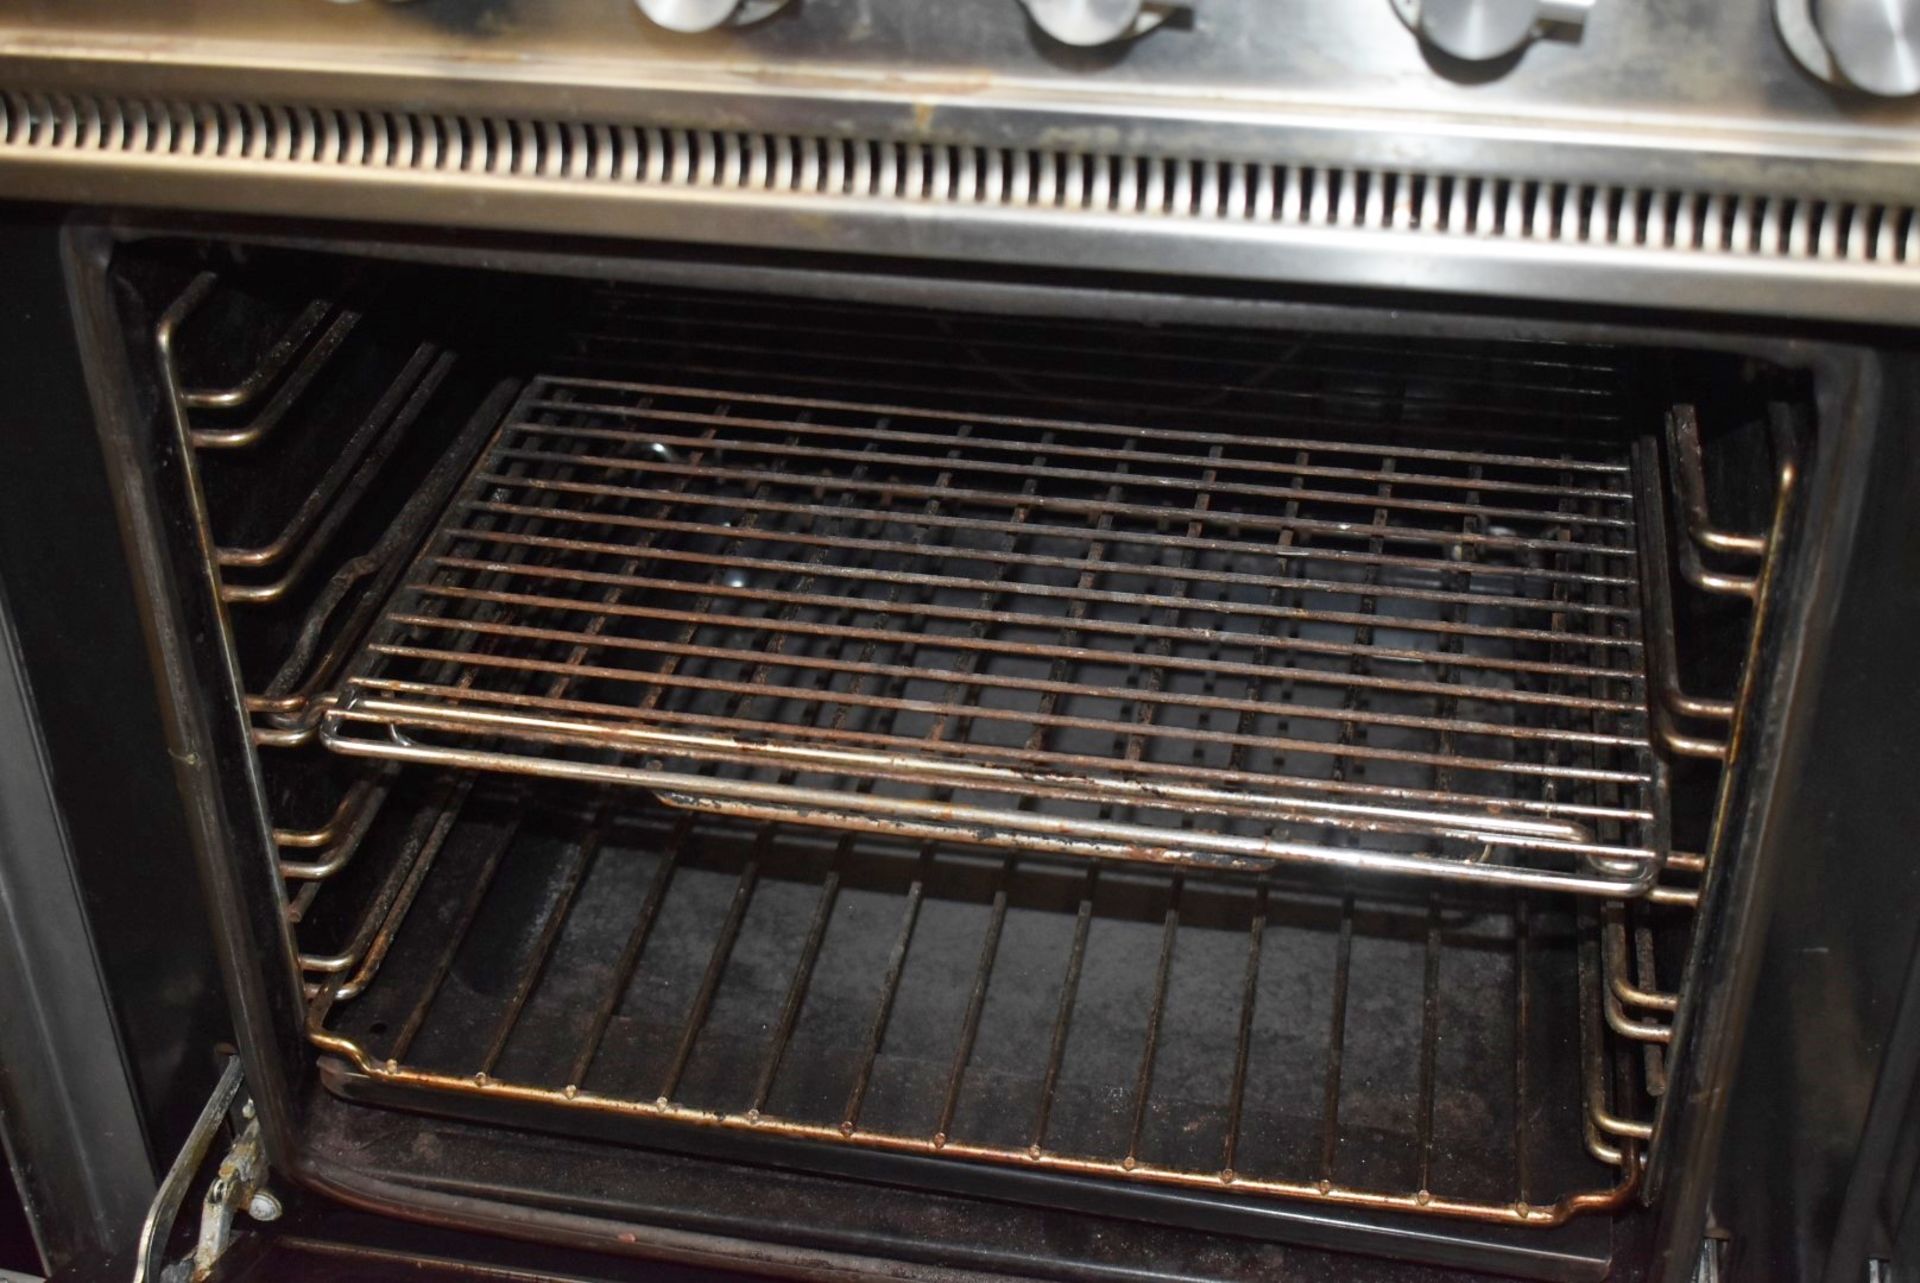 1 x Britainia 90cm Gas Range Cooker With Stainless Steel Finish and Accessories - Requires Attention - Image 8 of 10